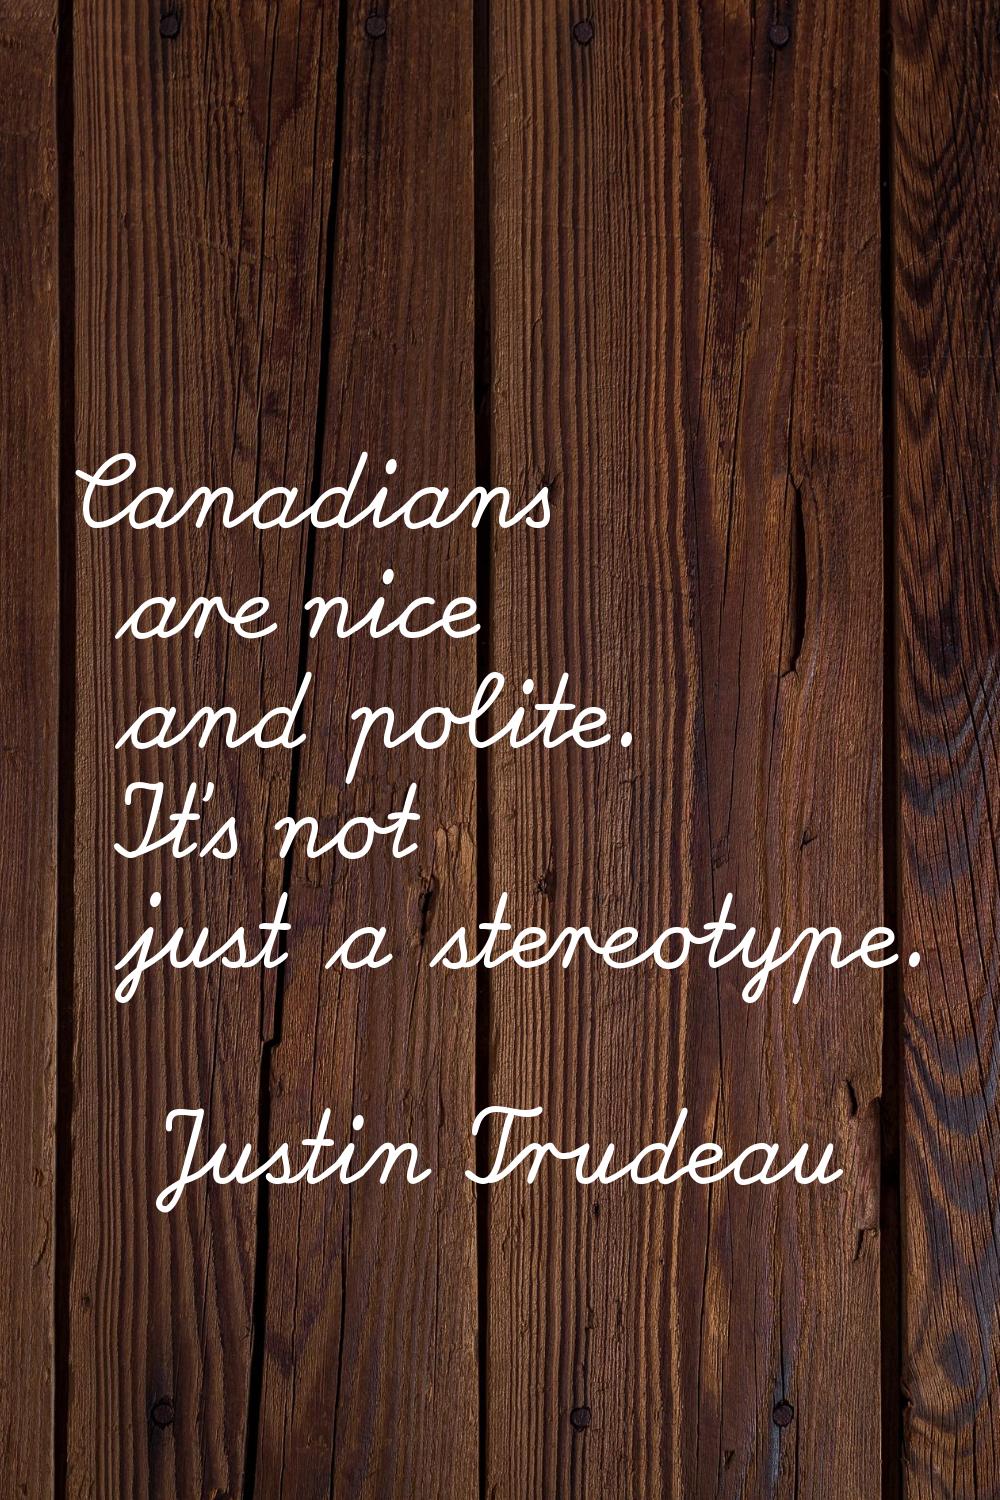 Canadians are nice and polite. It's not just a stereotype.